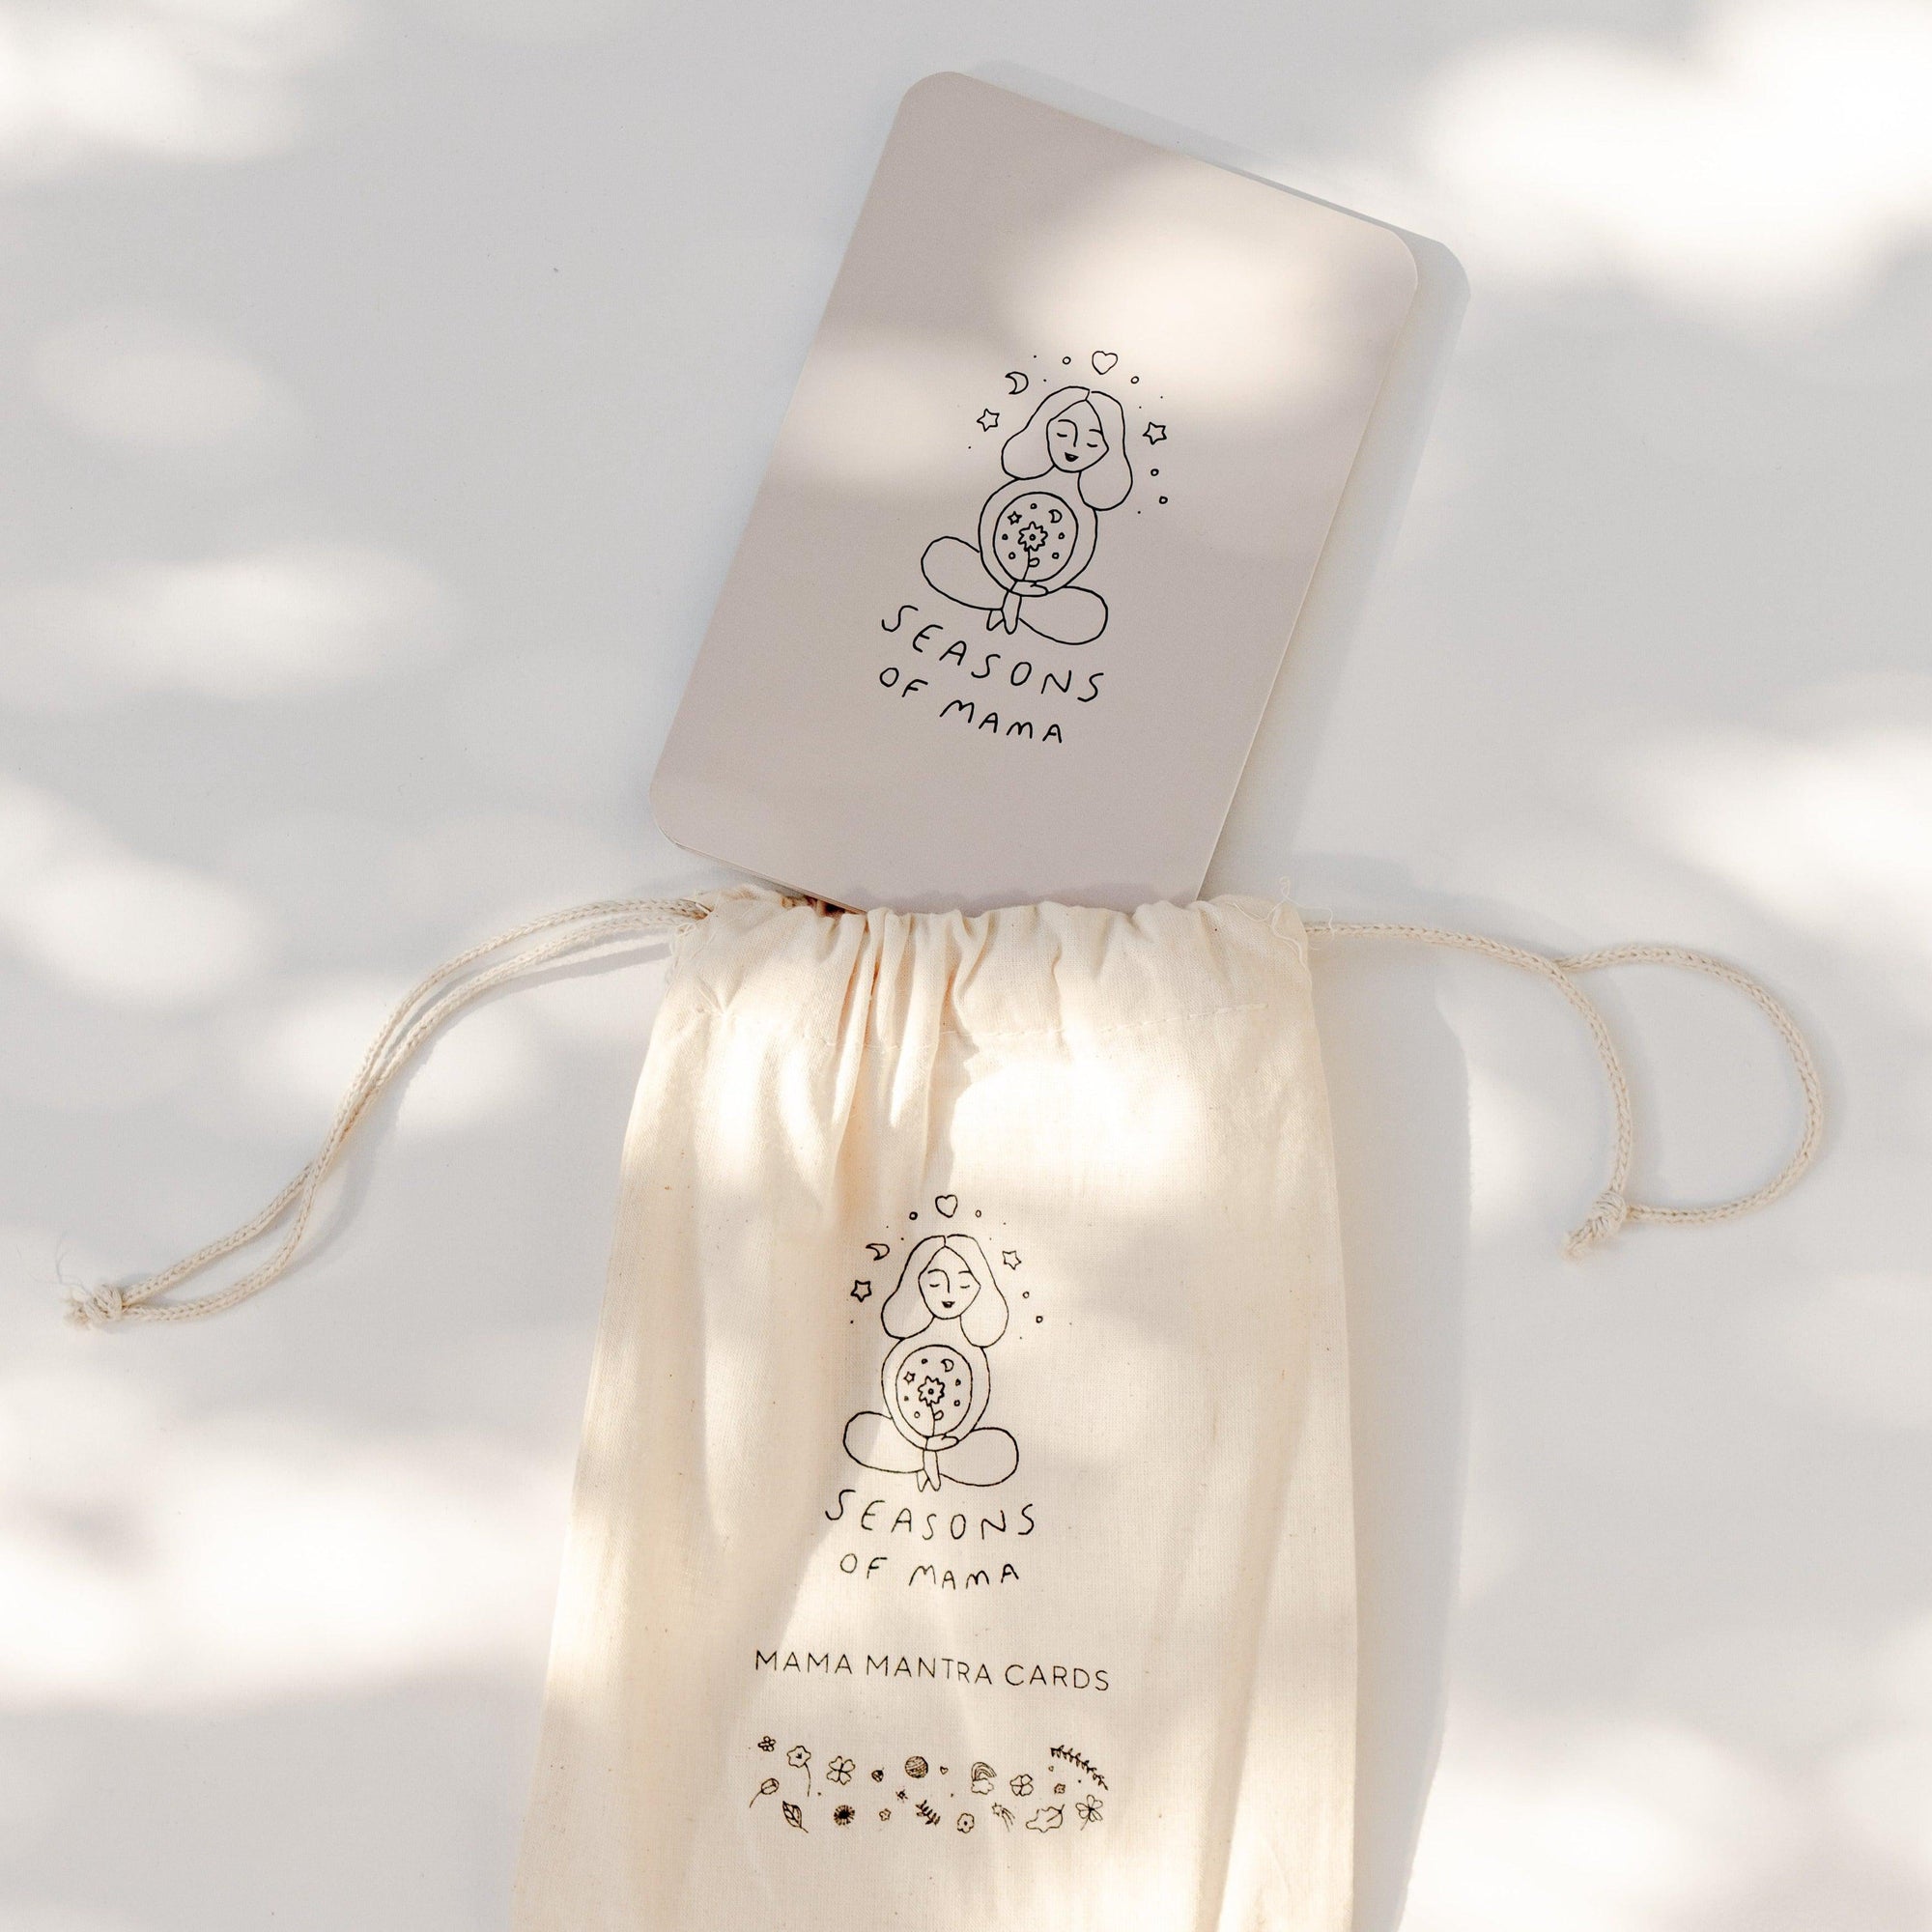 A branded calico bag with the Mama Mantra Cards by Seasons of Mama, featuring mother card quotes.